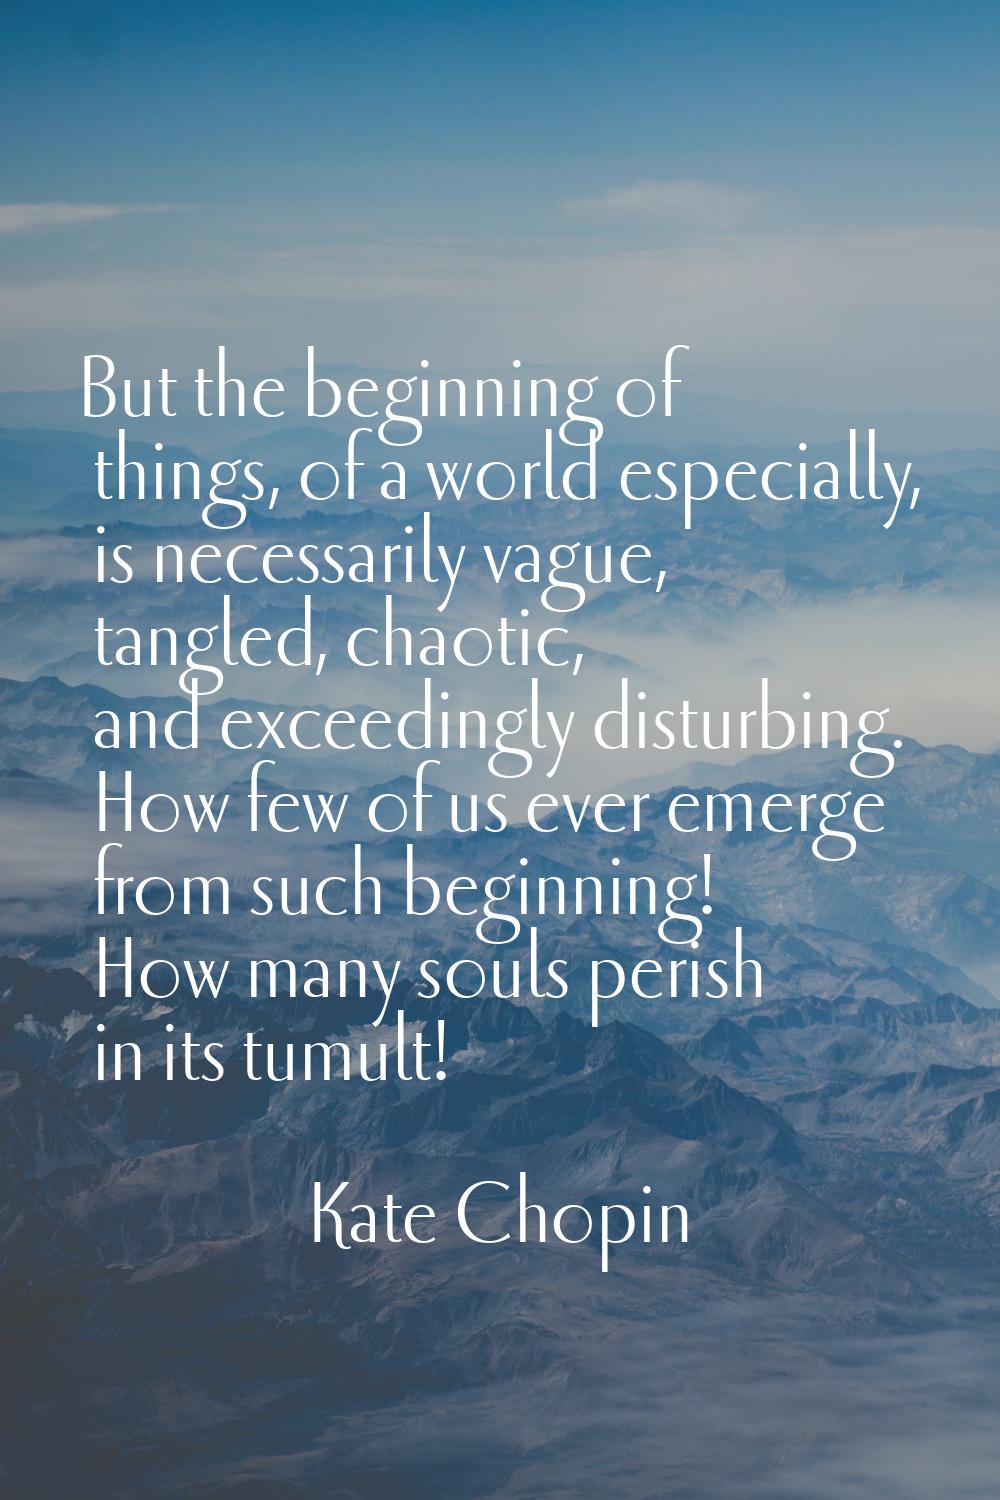 But the beginning of things, of a world especially, is necessarily vague, tangled, chaotic, and exc